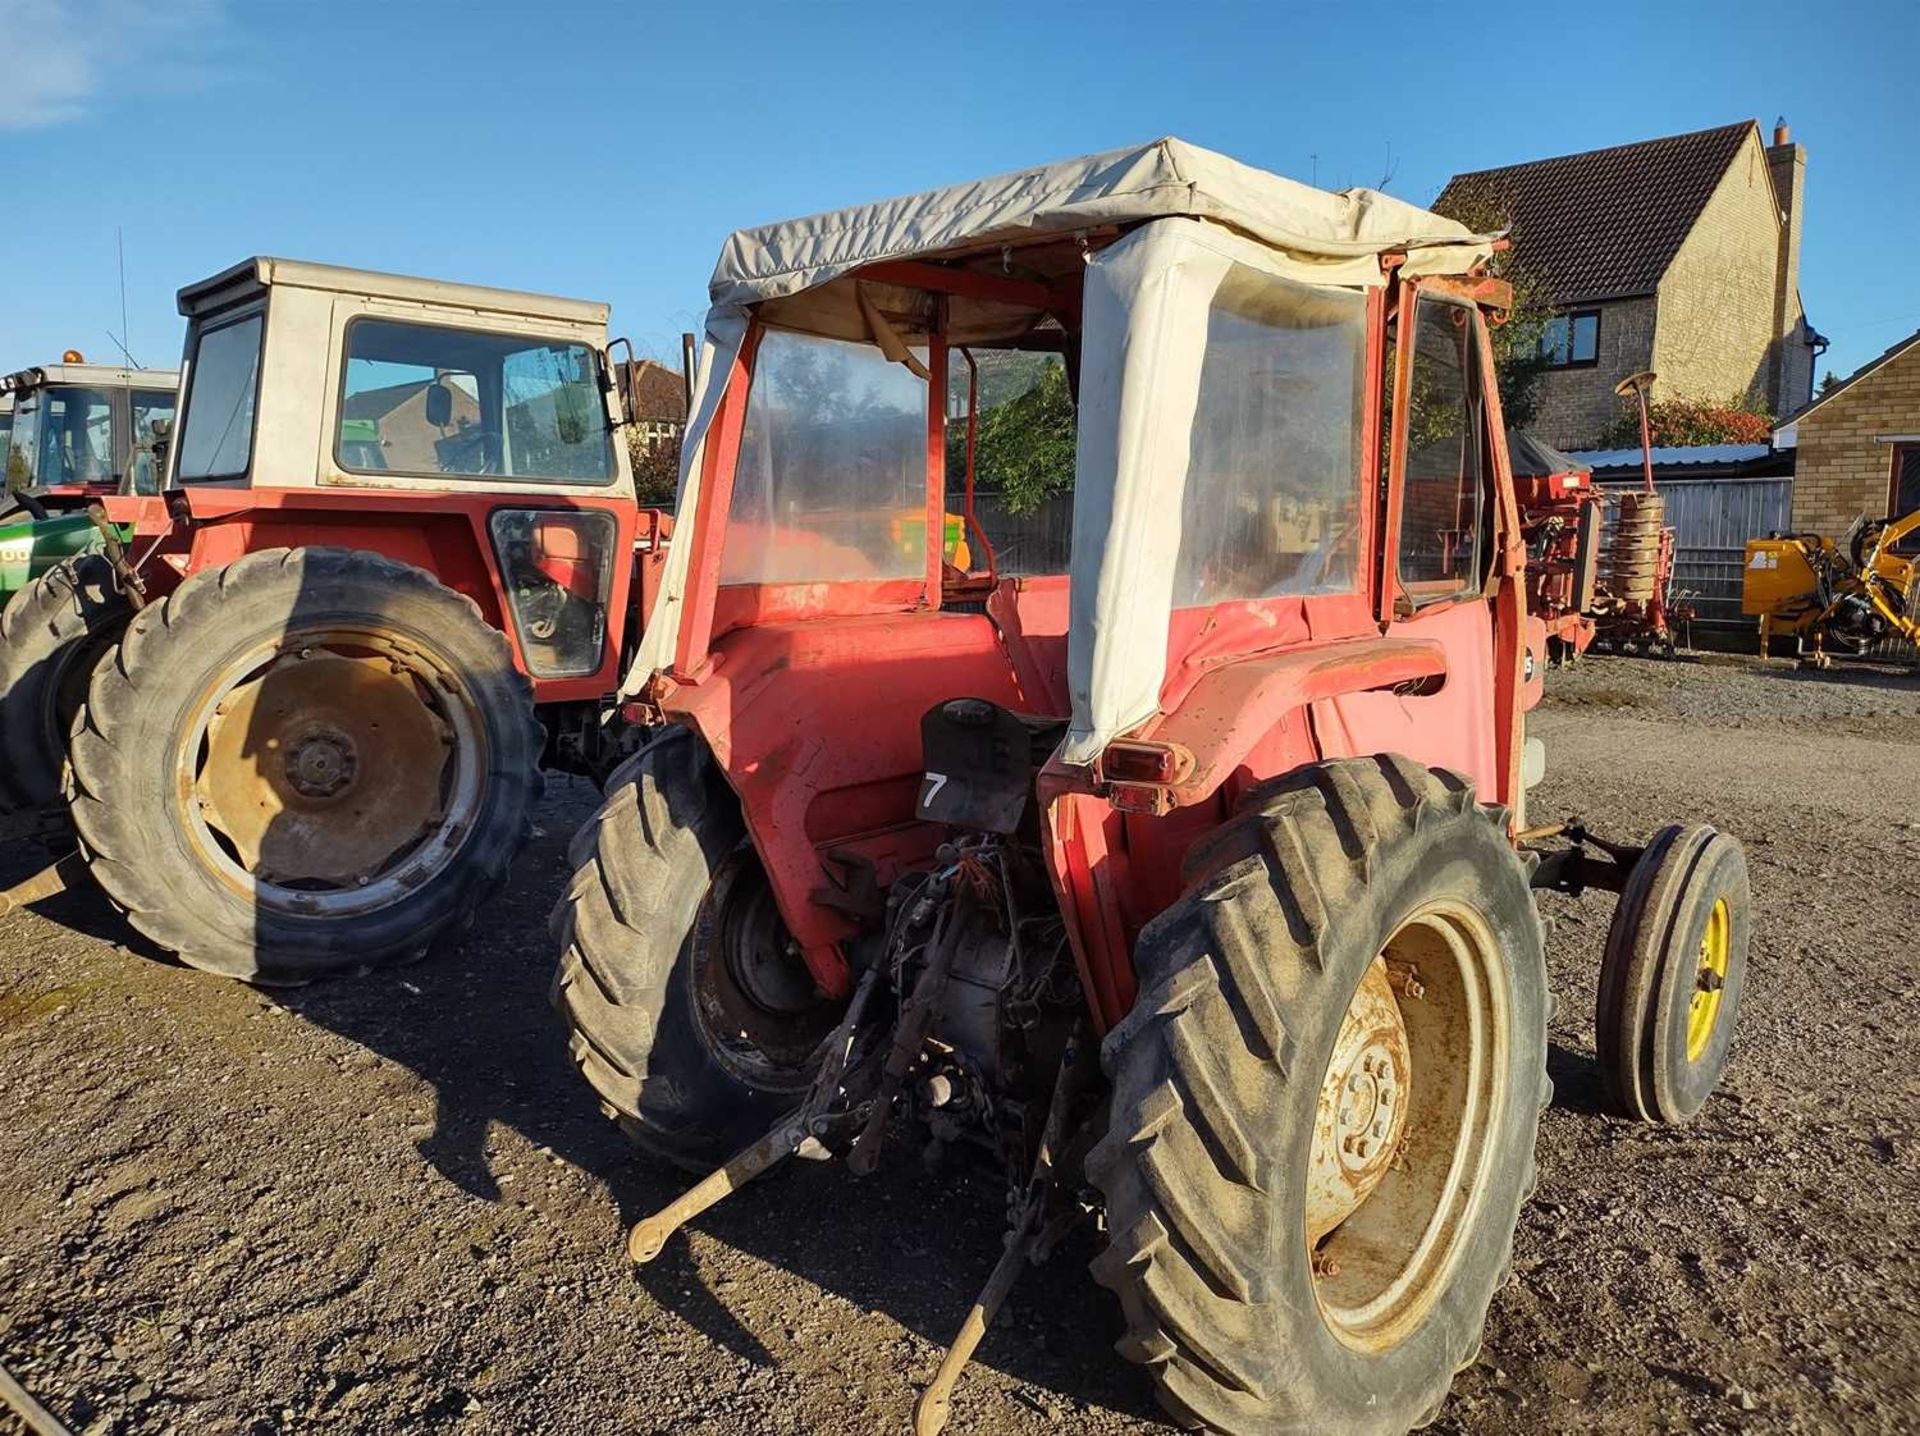 Massey Ferguson 135 Tractor with Original Front Wheels. Pickup Hitch. 2,284 Hrs. Reg: 7JE 705X - Image 4 of 10